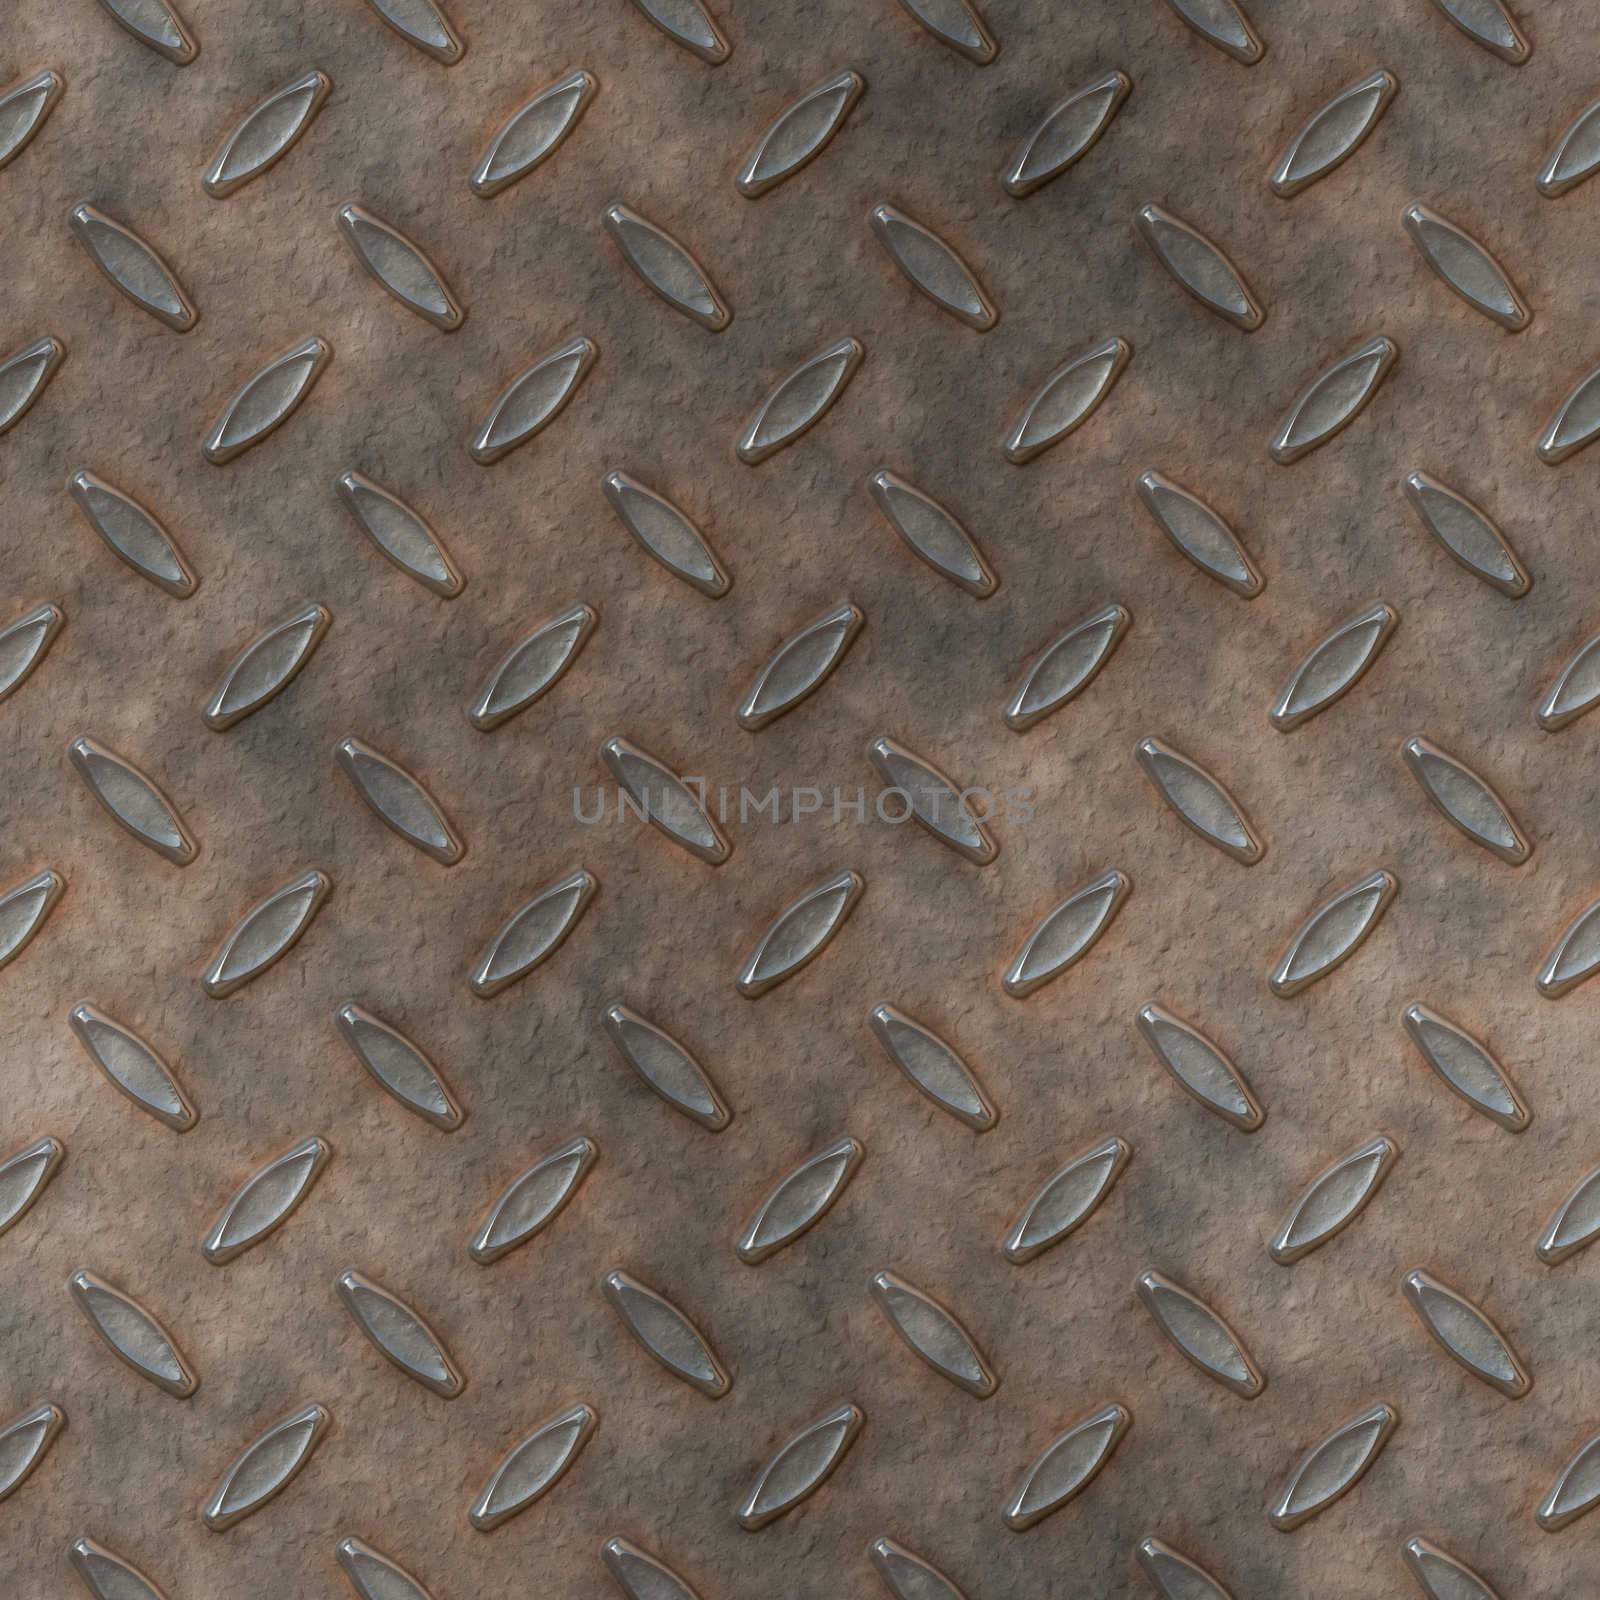 a large sheet of dirty and grungy diamond metal tread plate